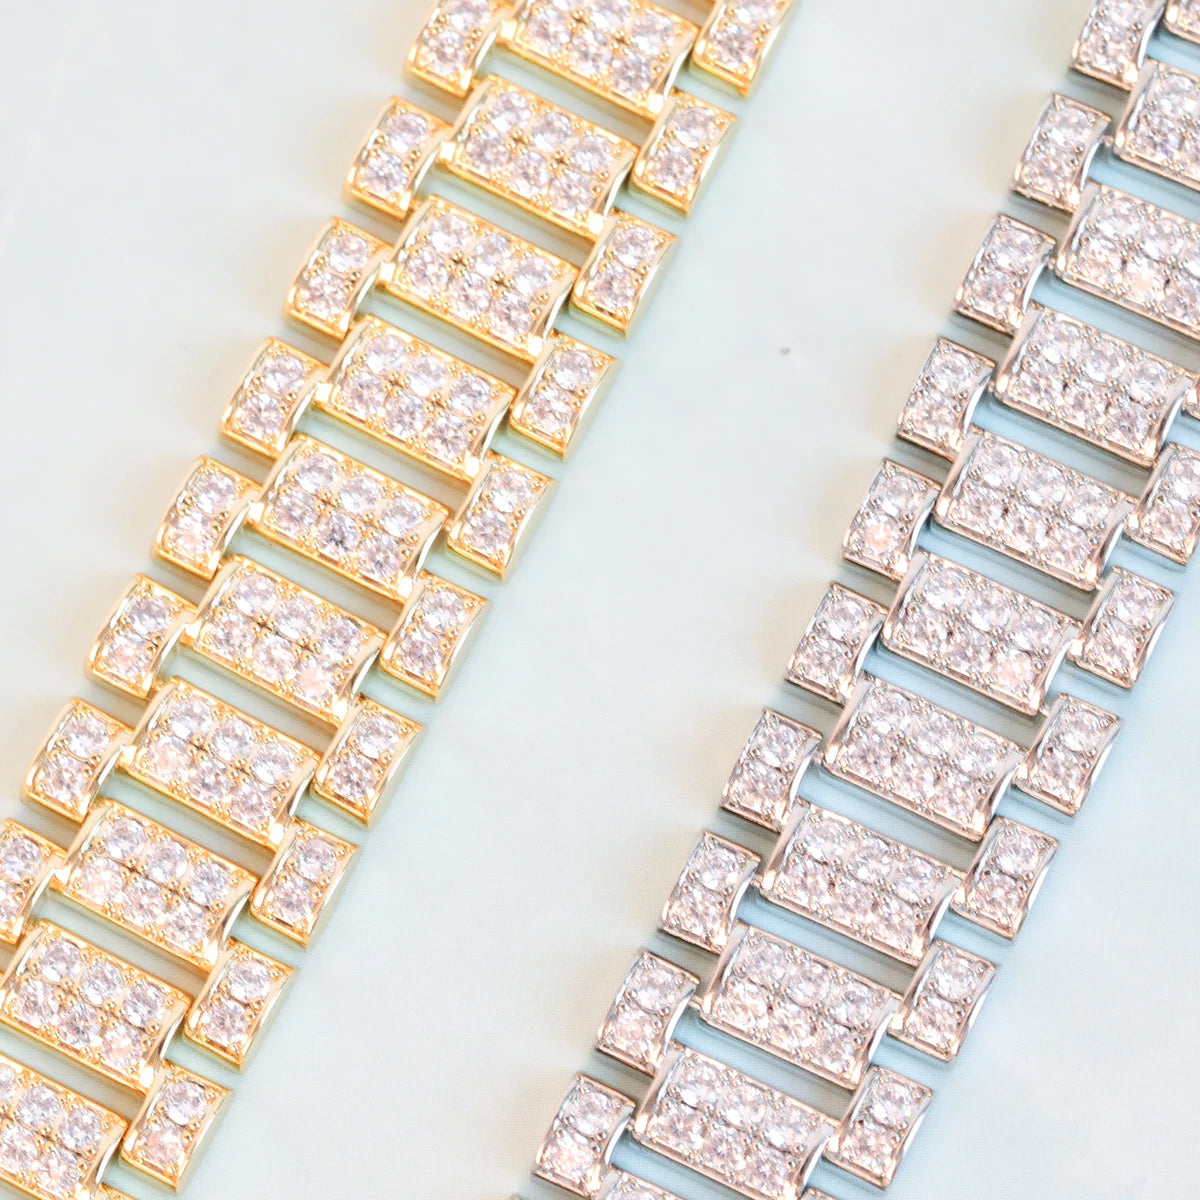 IceBox DC: Unisex 3A+ CZ Iced Out Link Bracelet/Necklace (Gold or Silver Plated)